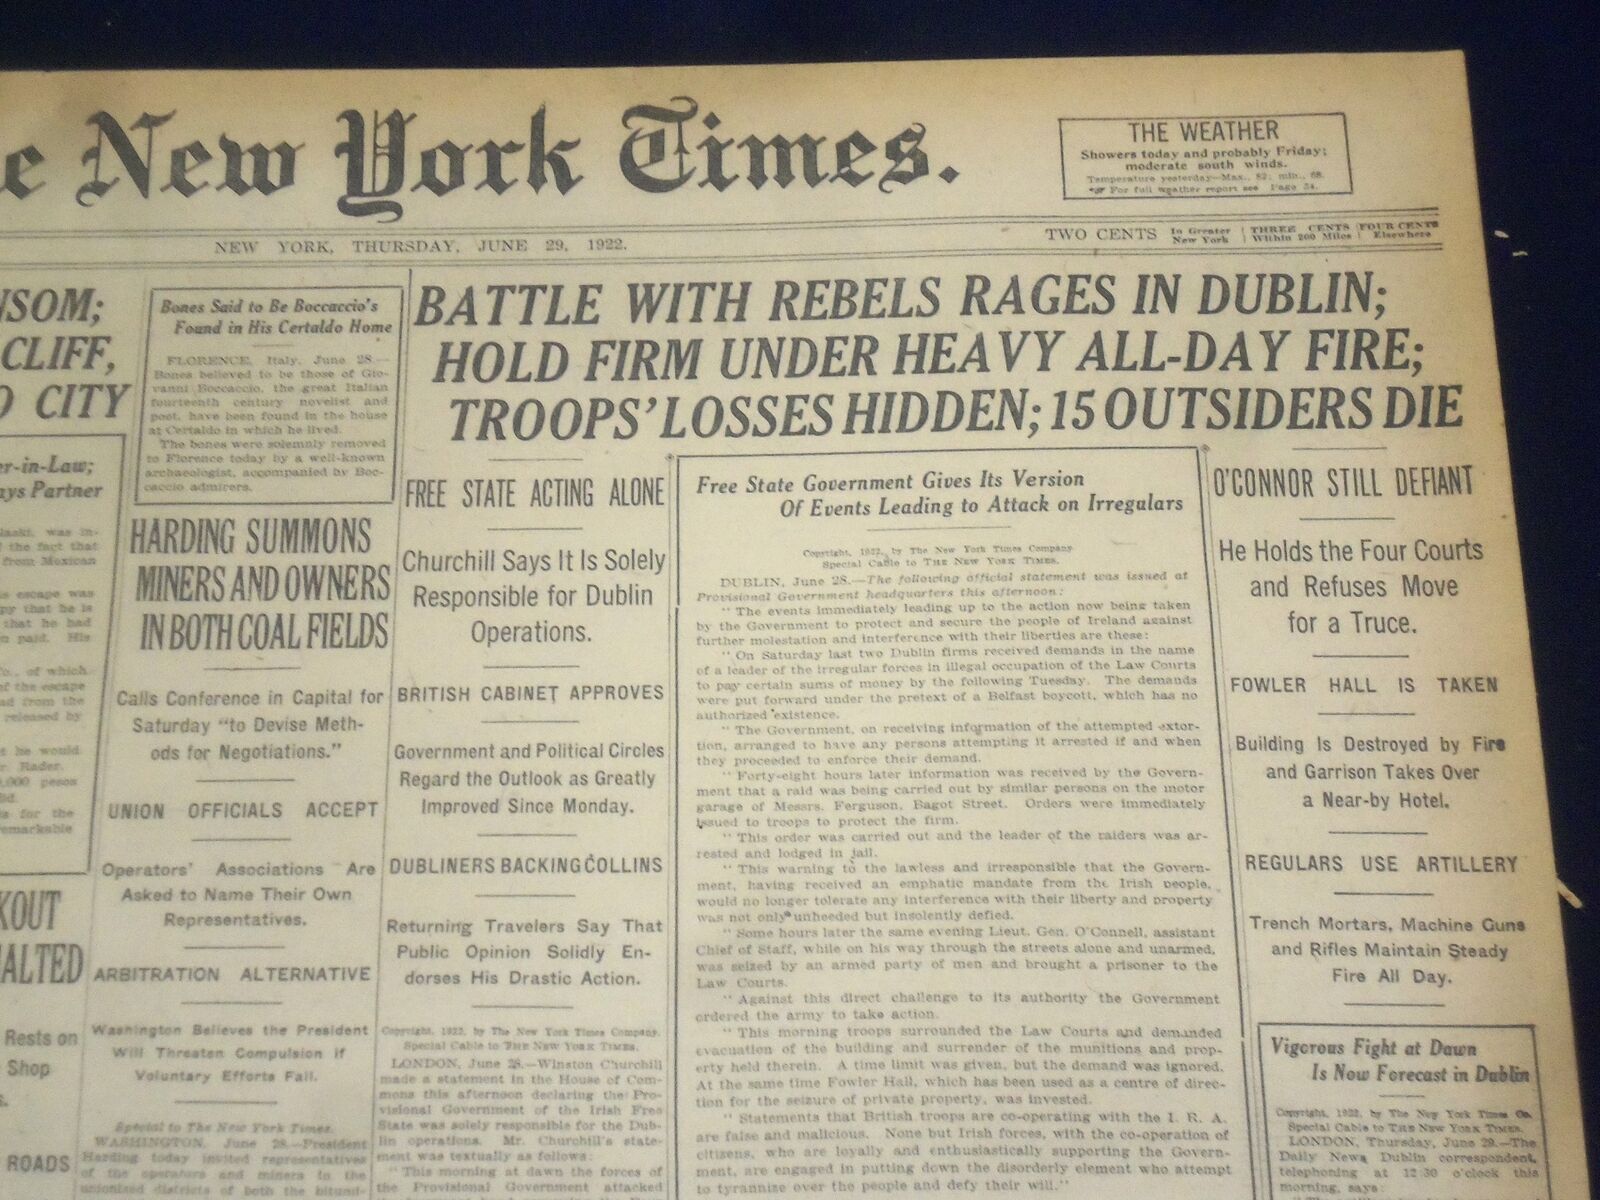 1922 JUNE 29 NEW YORK TIMES - BATTLE WITH REBELS RAGES IN DUBLIN - NT 8404